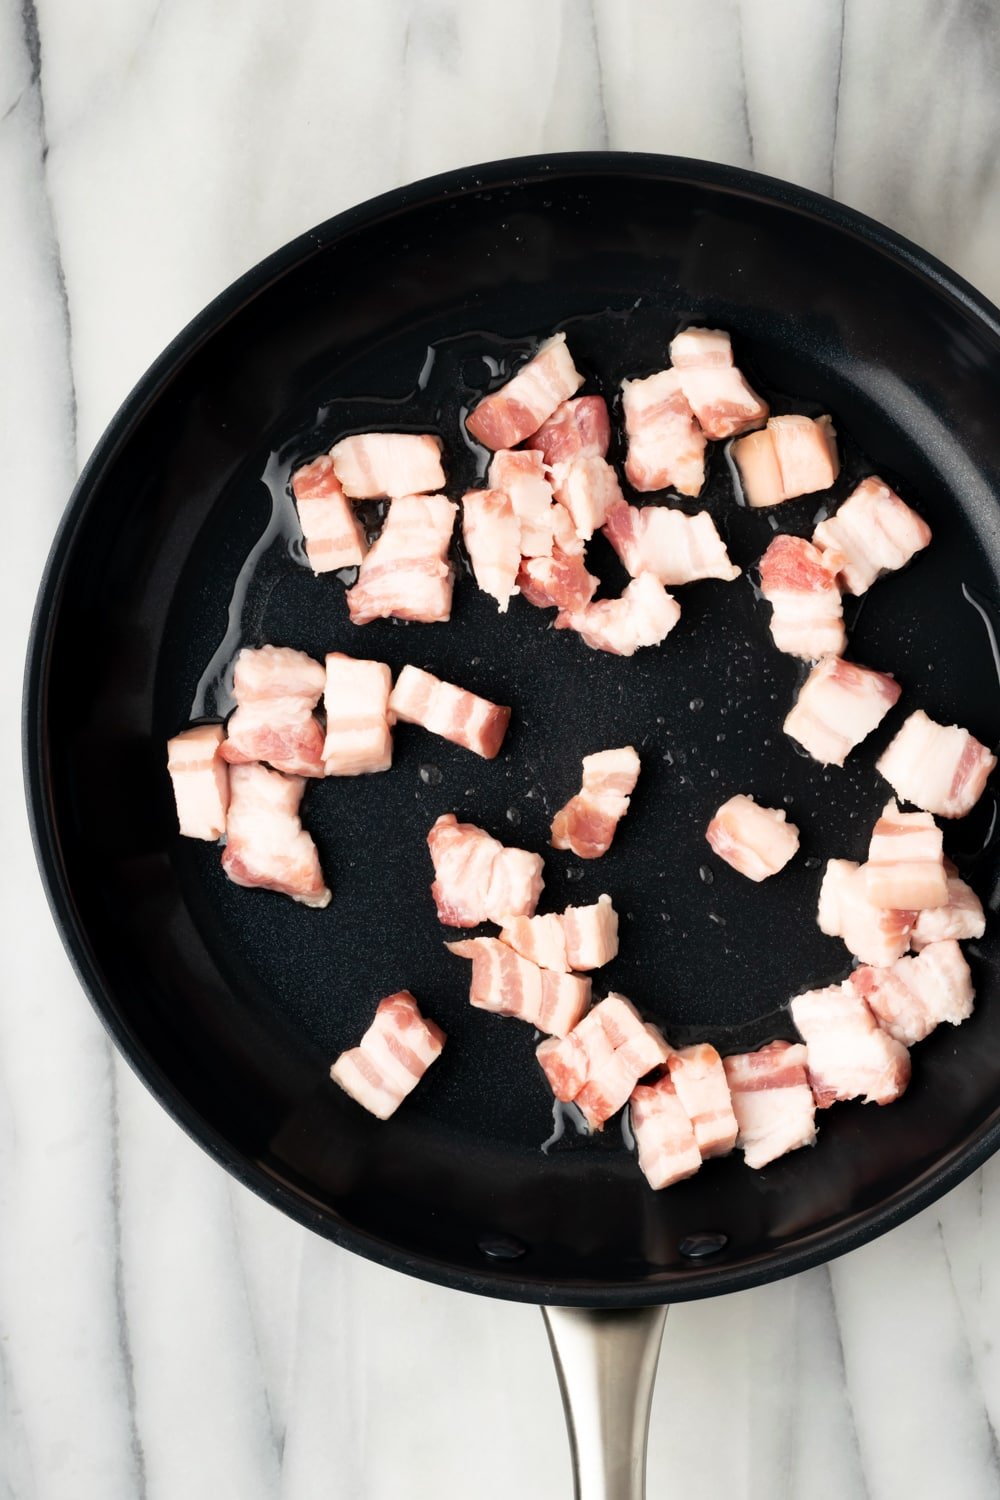 Uncooked pork belly pieces in a cast iron skillet on a marble background